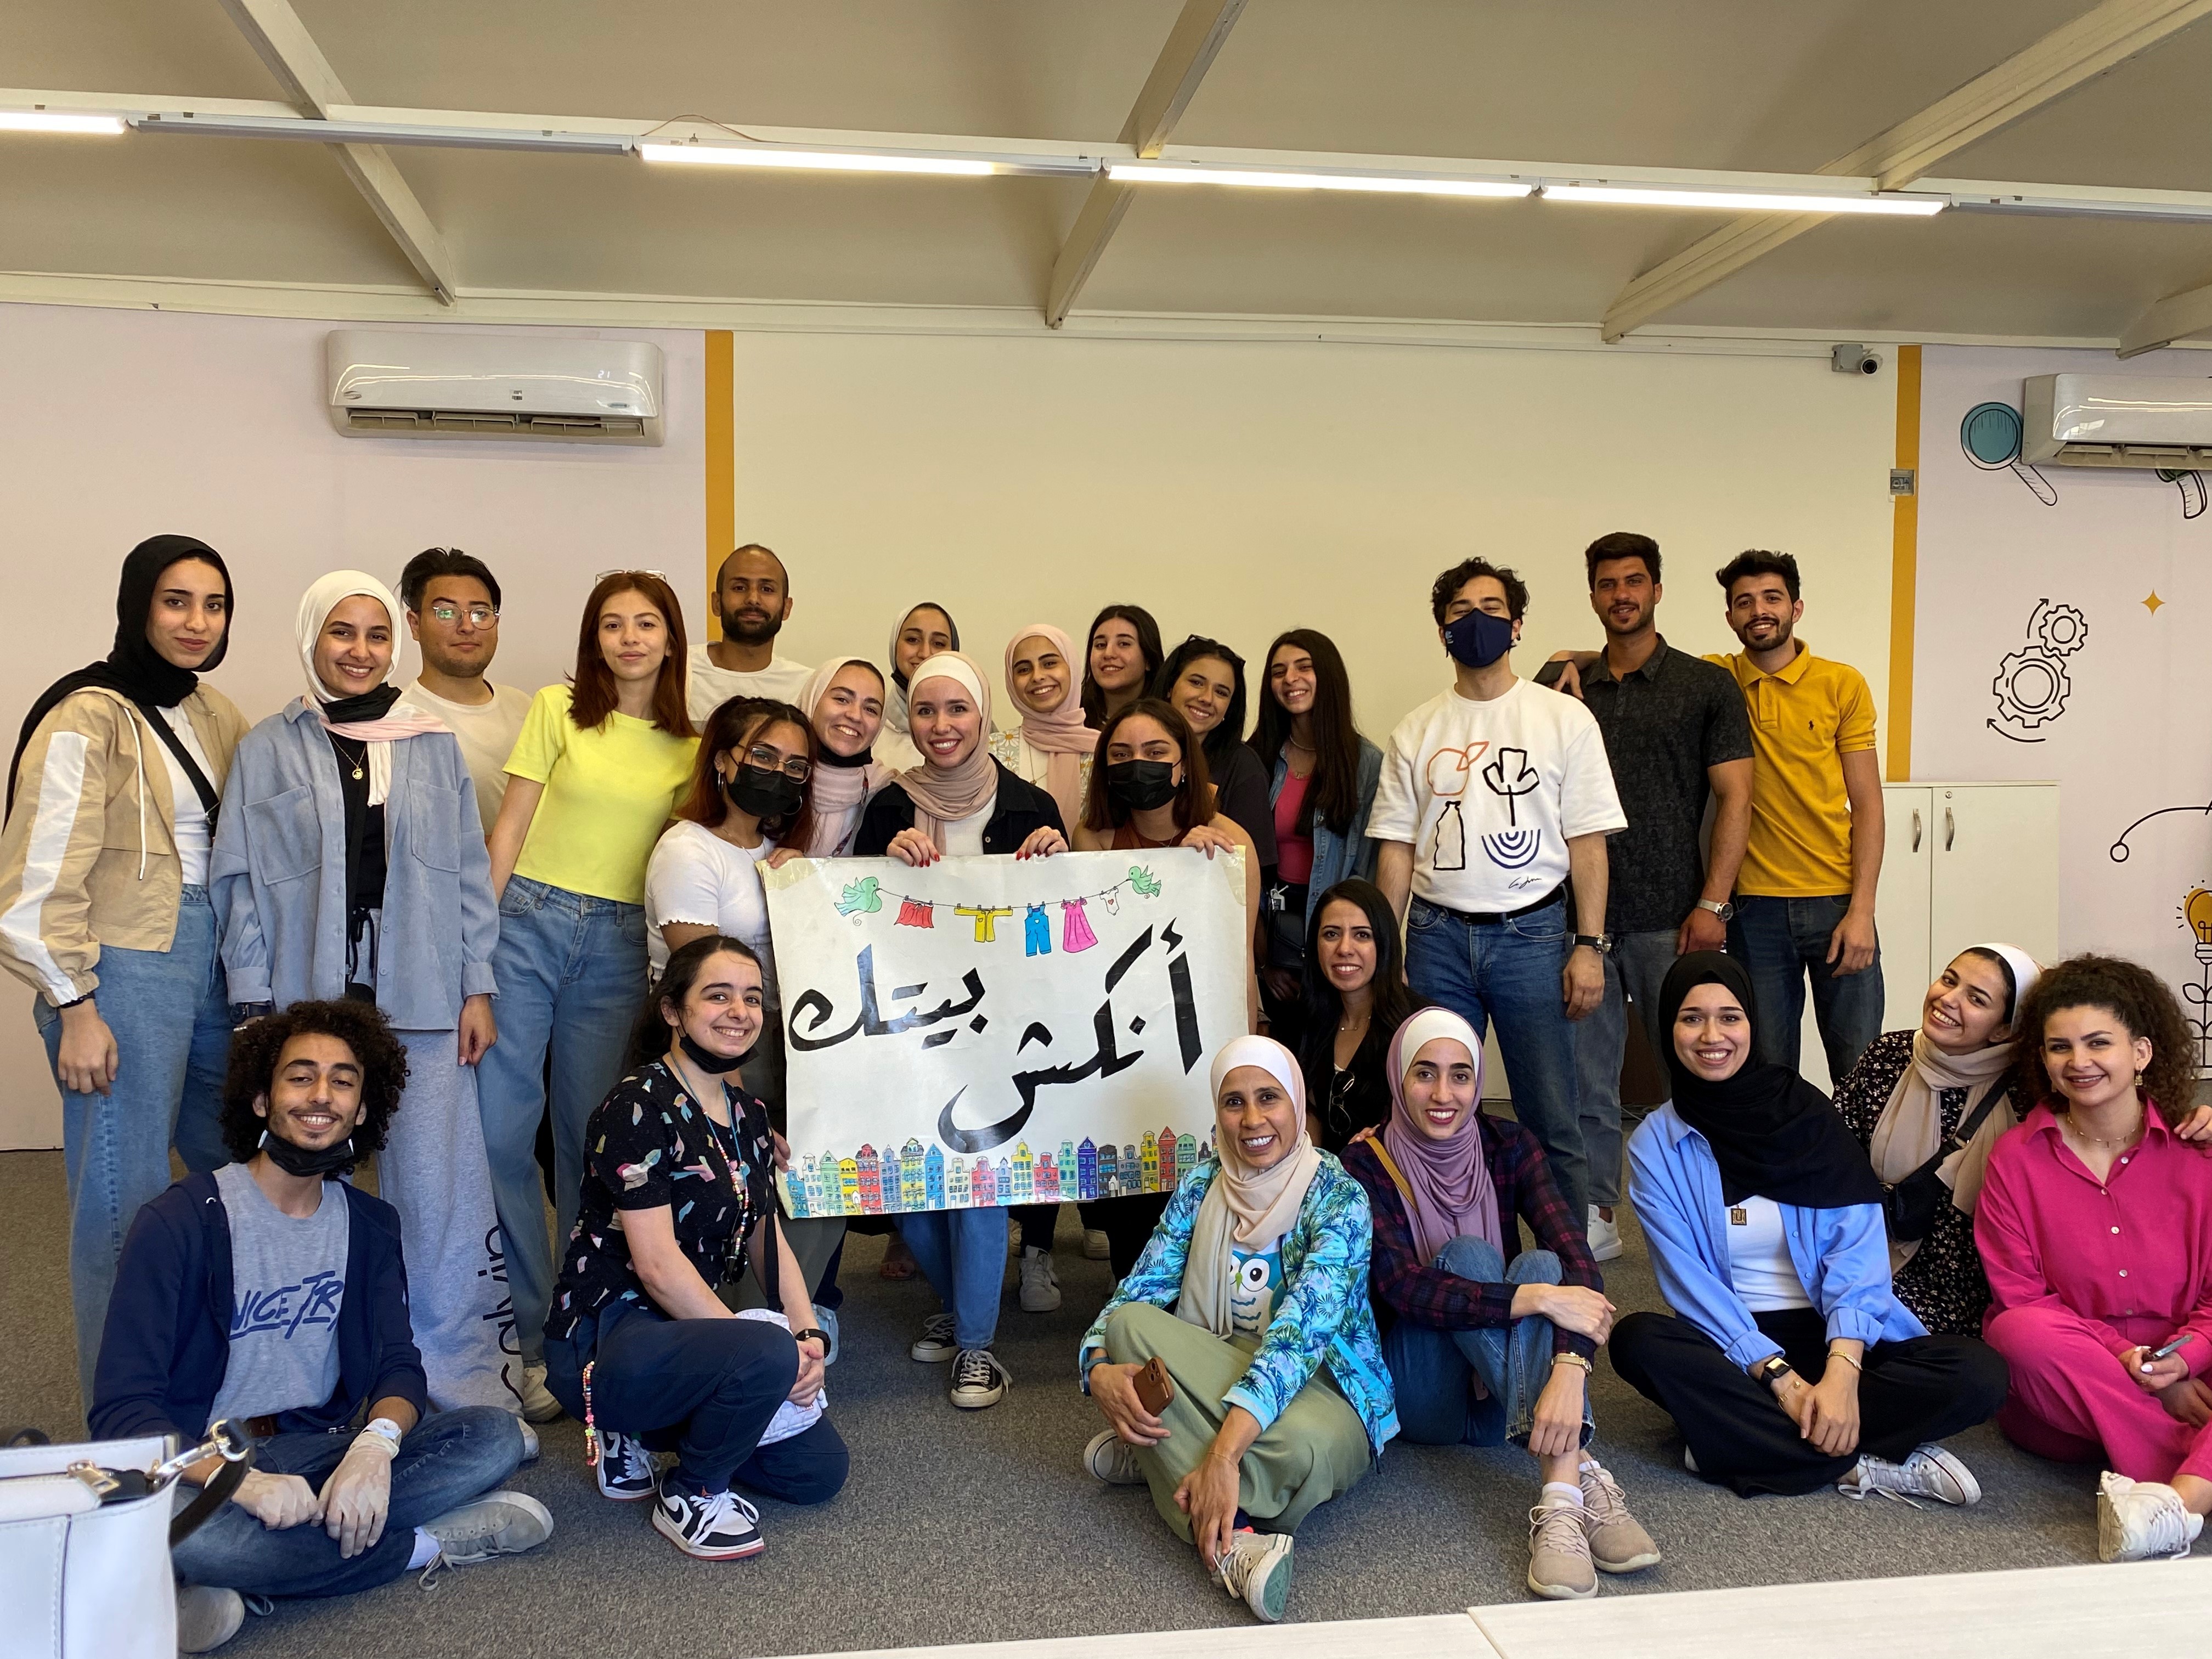 Group photo with Jordanian alumni holding a banner